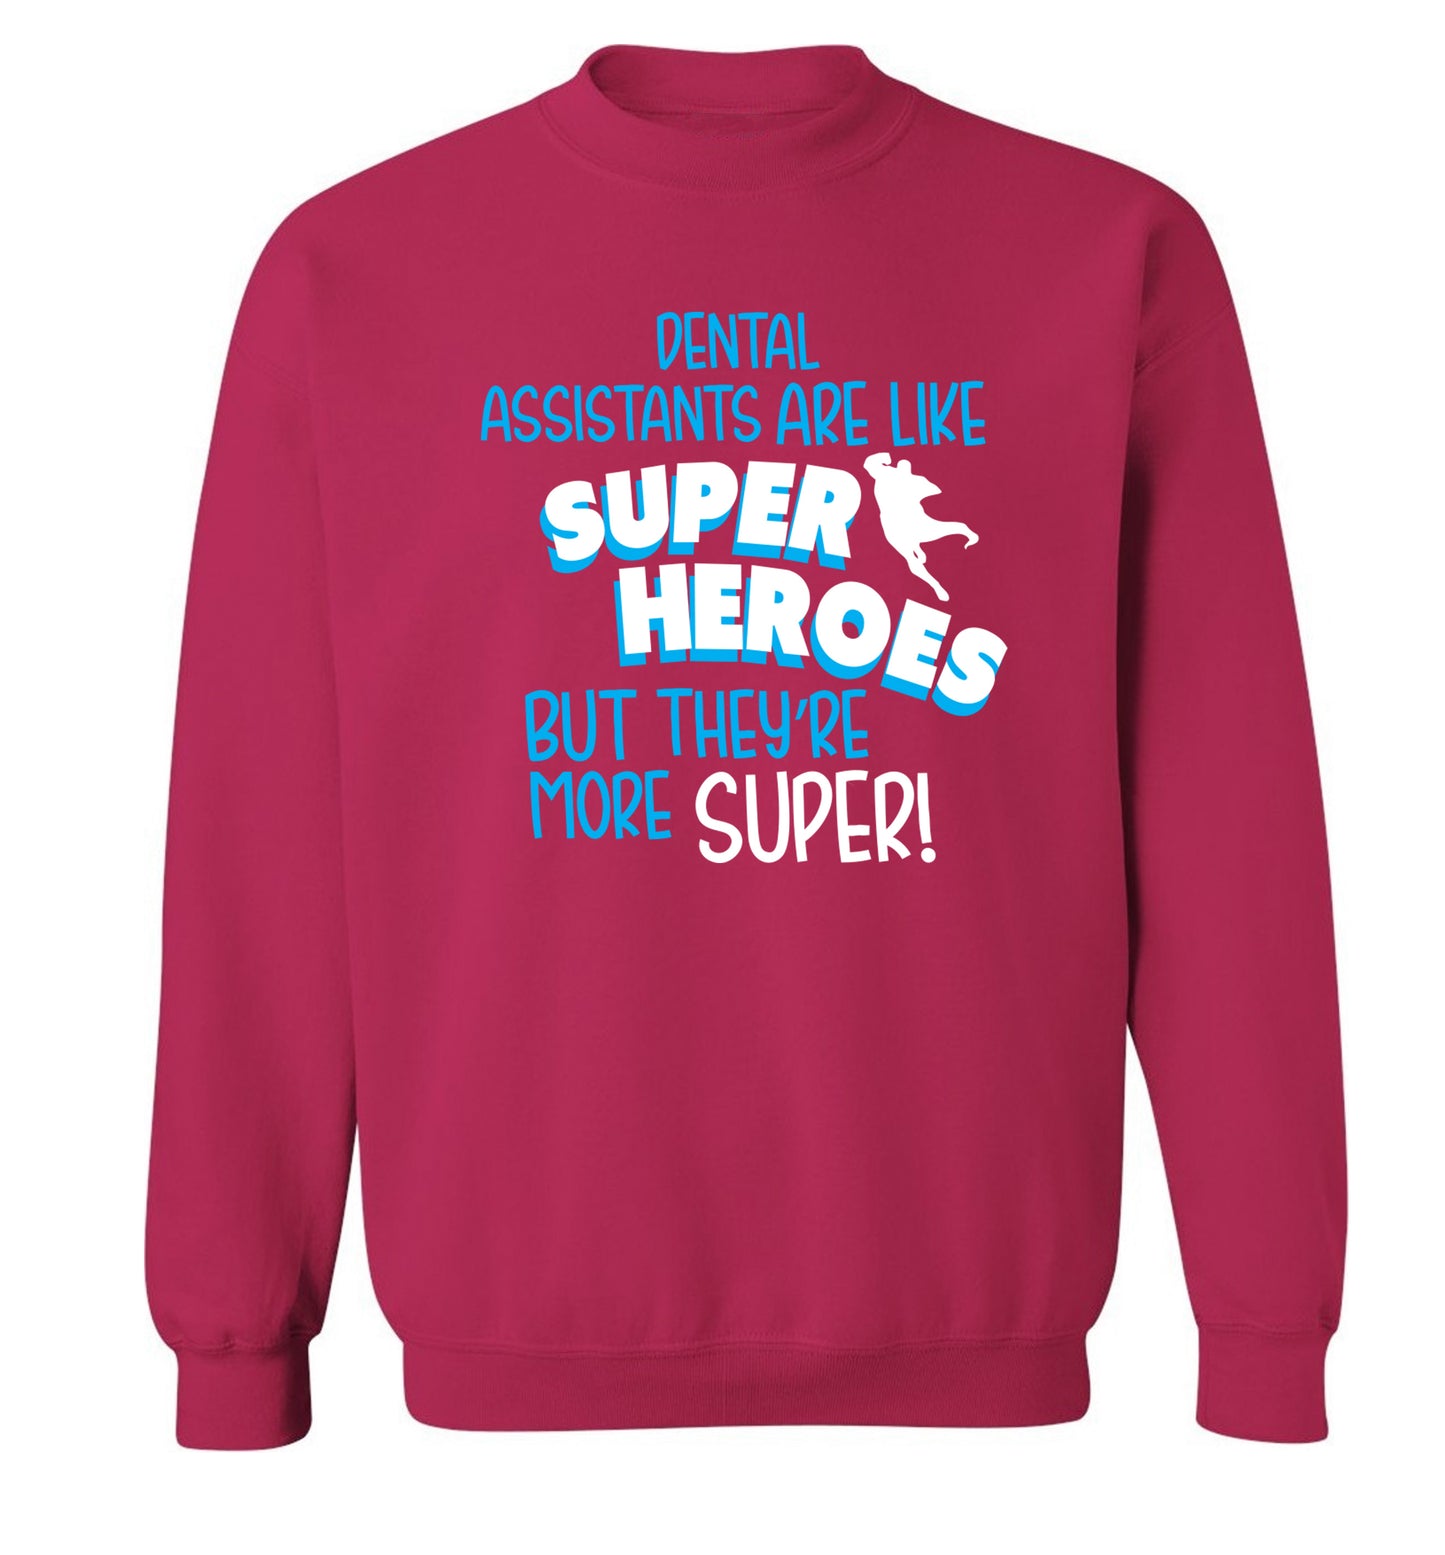 Dental Assistants are like superheros but they're more super Adult's unisex pink Sweater 2XL